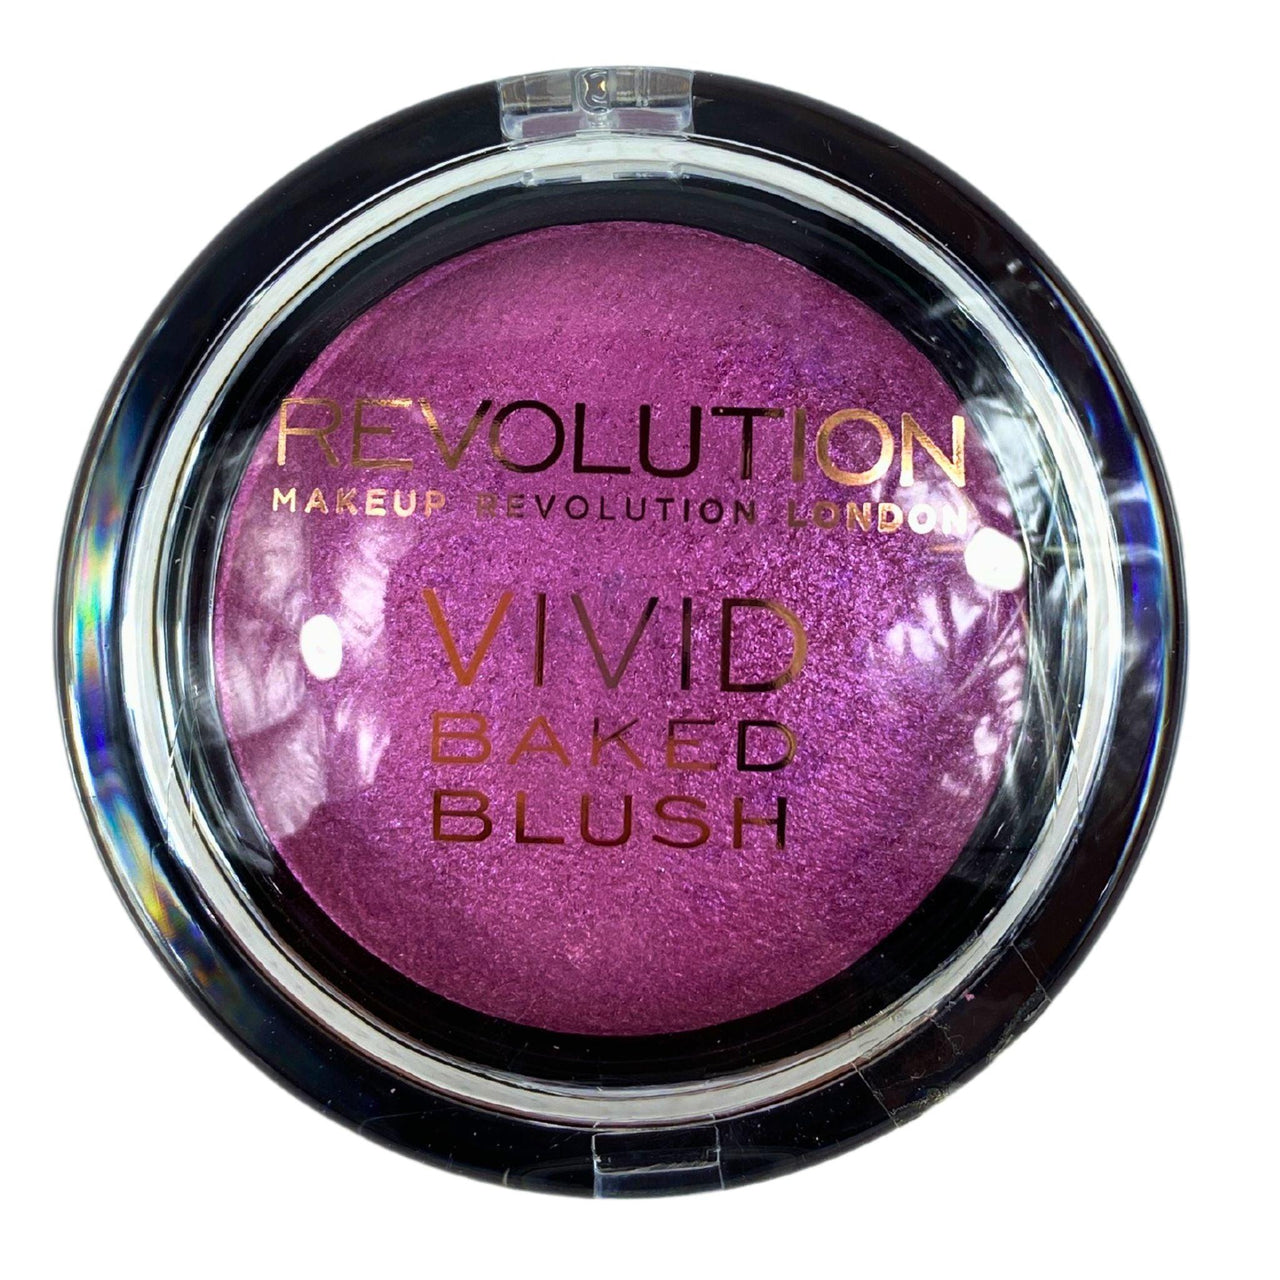 Revolution Vivid Baked Blush 0.21OZ "One For Playing Games (72 Pca lot) - Discount Wholesalers Inc